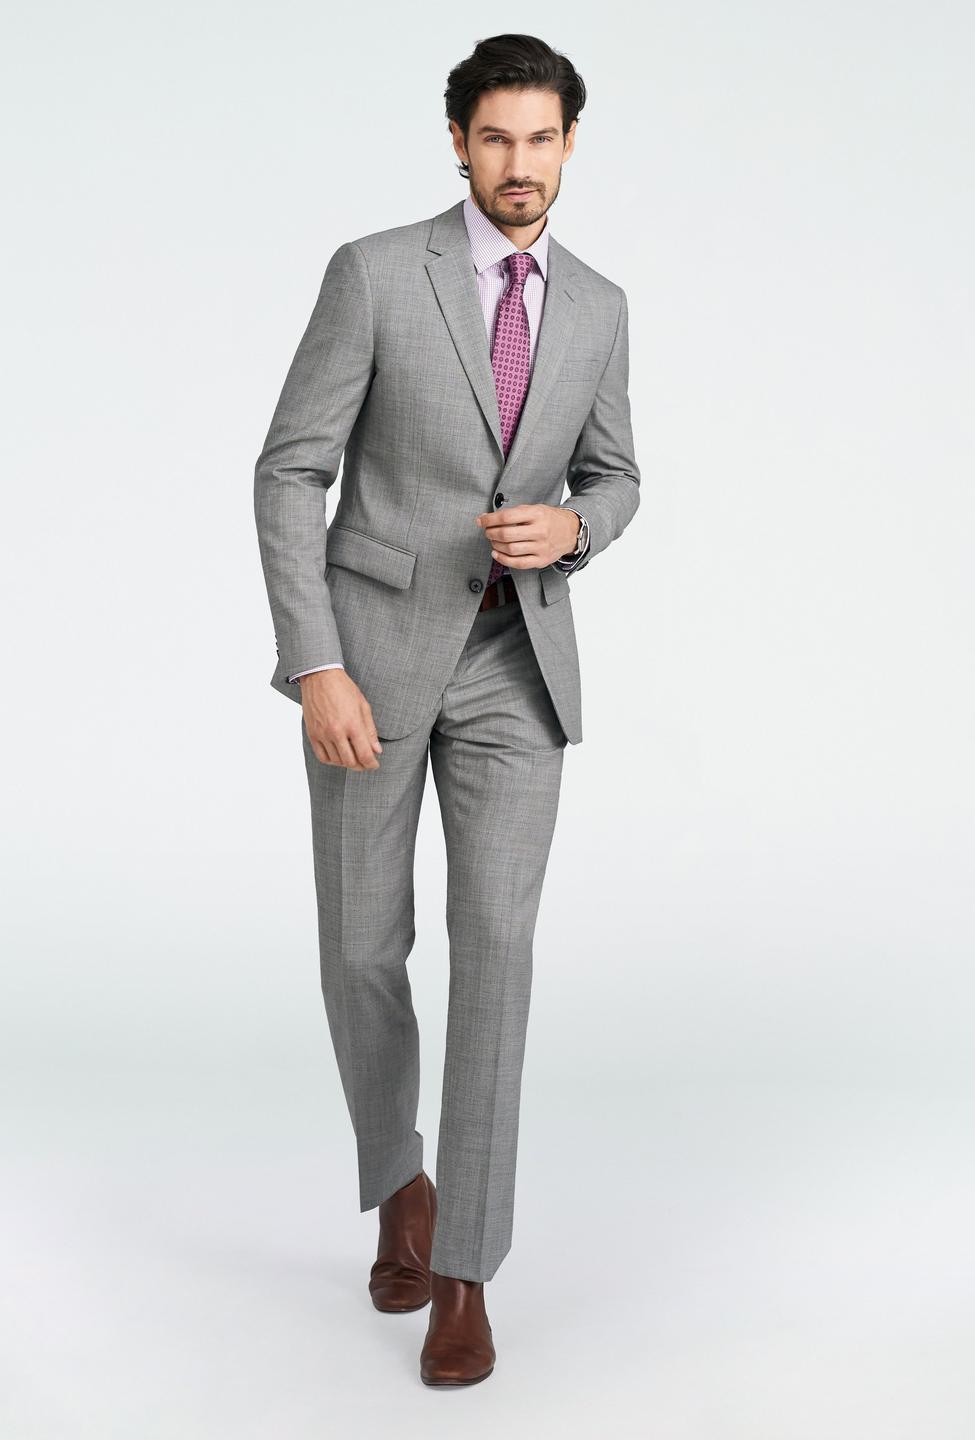 Gray suit - Hayle Solid Design from Premium Indochino Collection